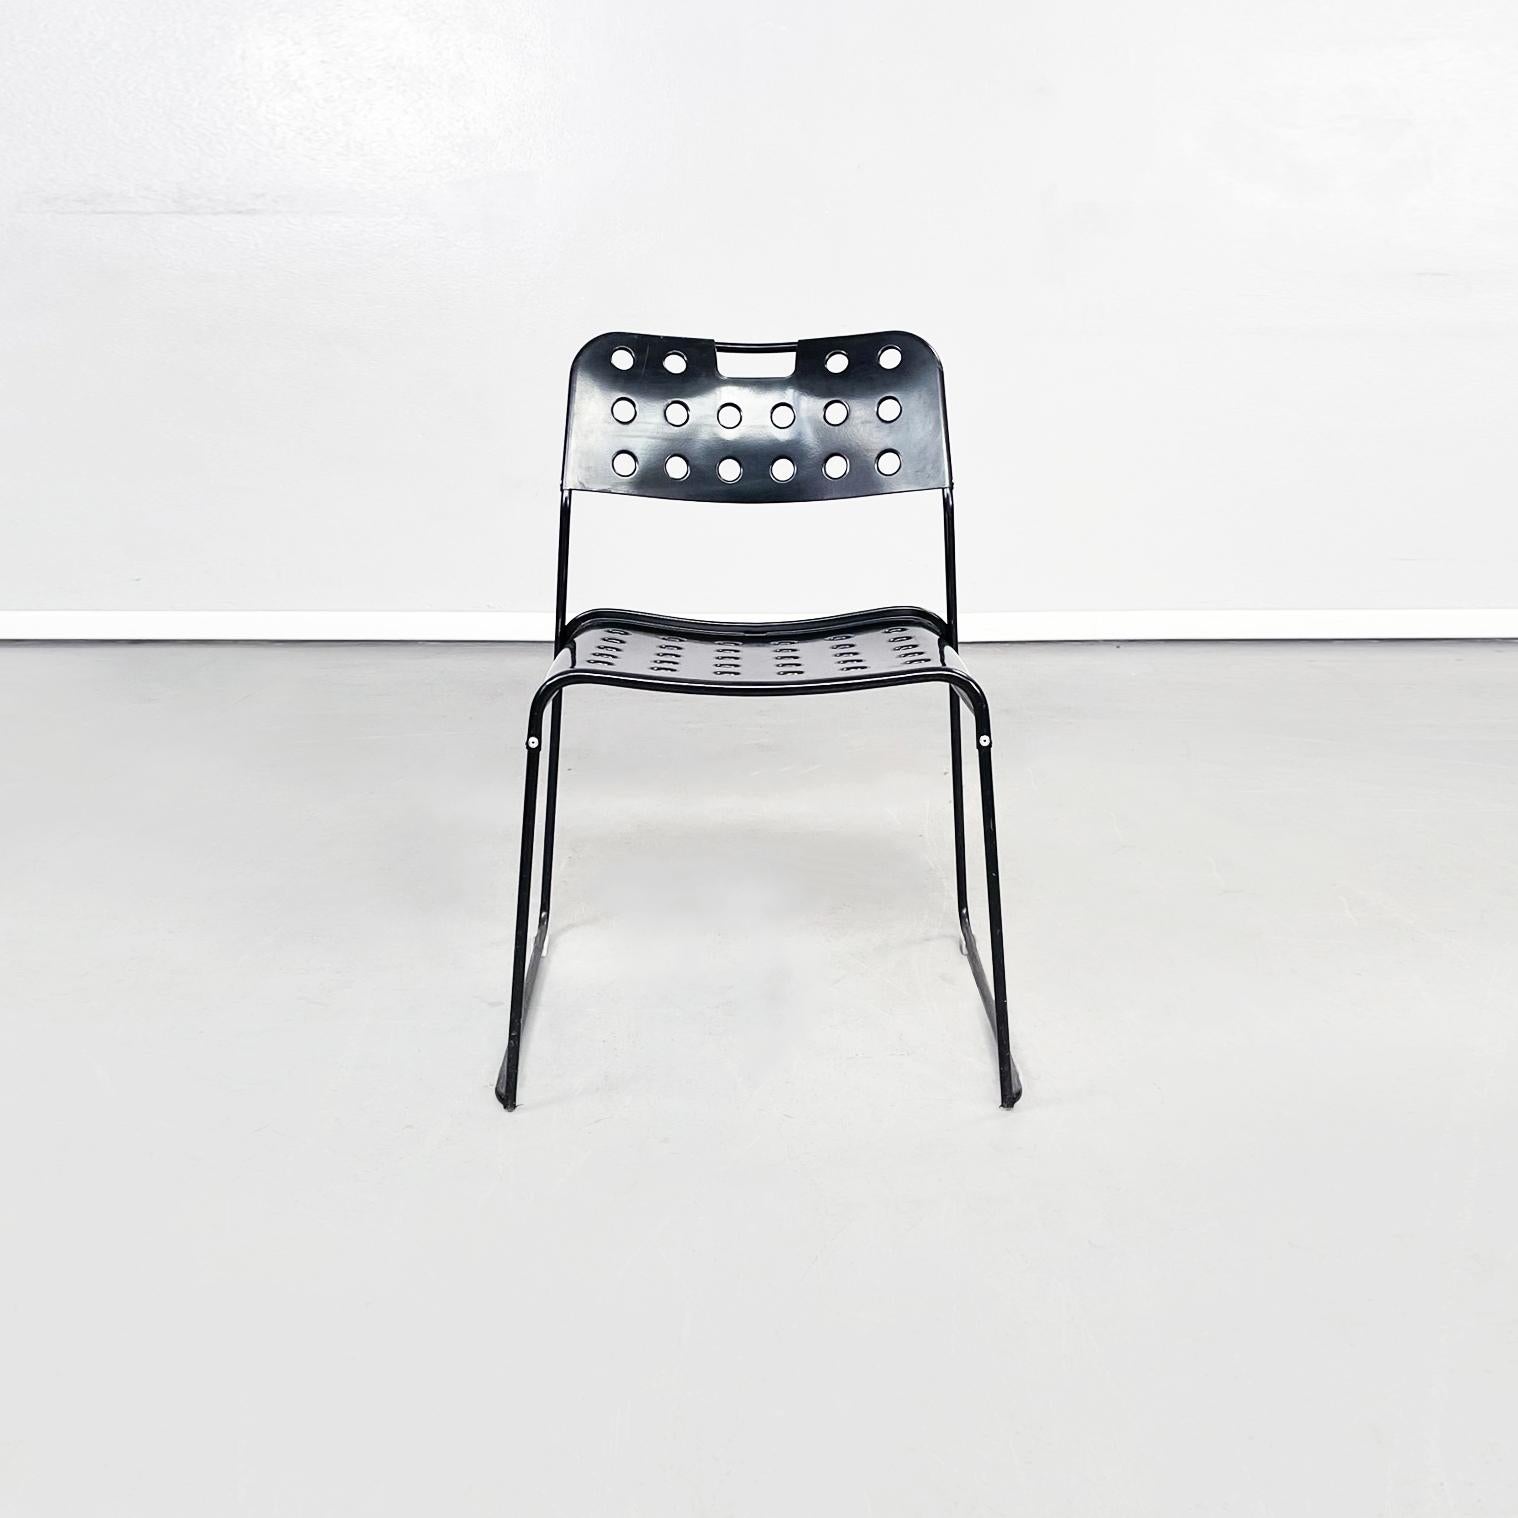 Italian modern Black steel chairs Omstak by Rodney Kinsman for Bieffeplast, 1970s
Fantastic pair of chairs mod. Omstak, with black painted steel rod structure. The seat and back in black painted metal have circular holes. Stackable.
Produced by